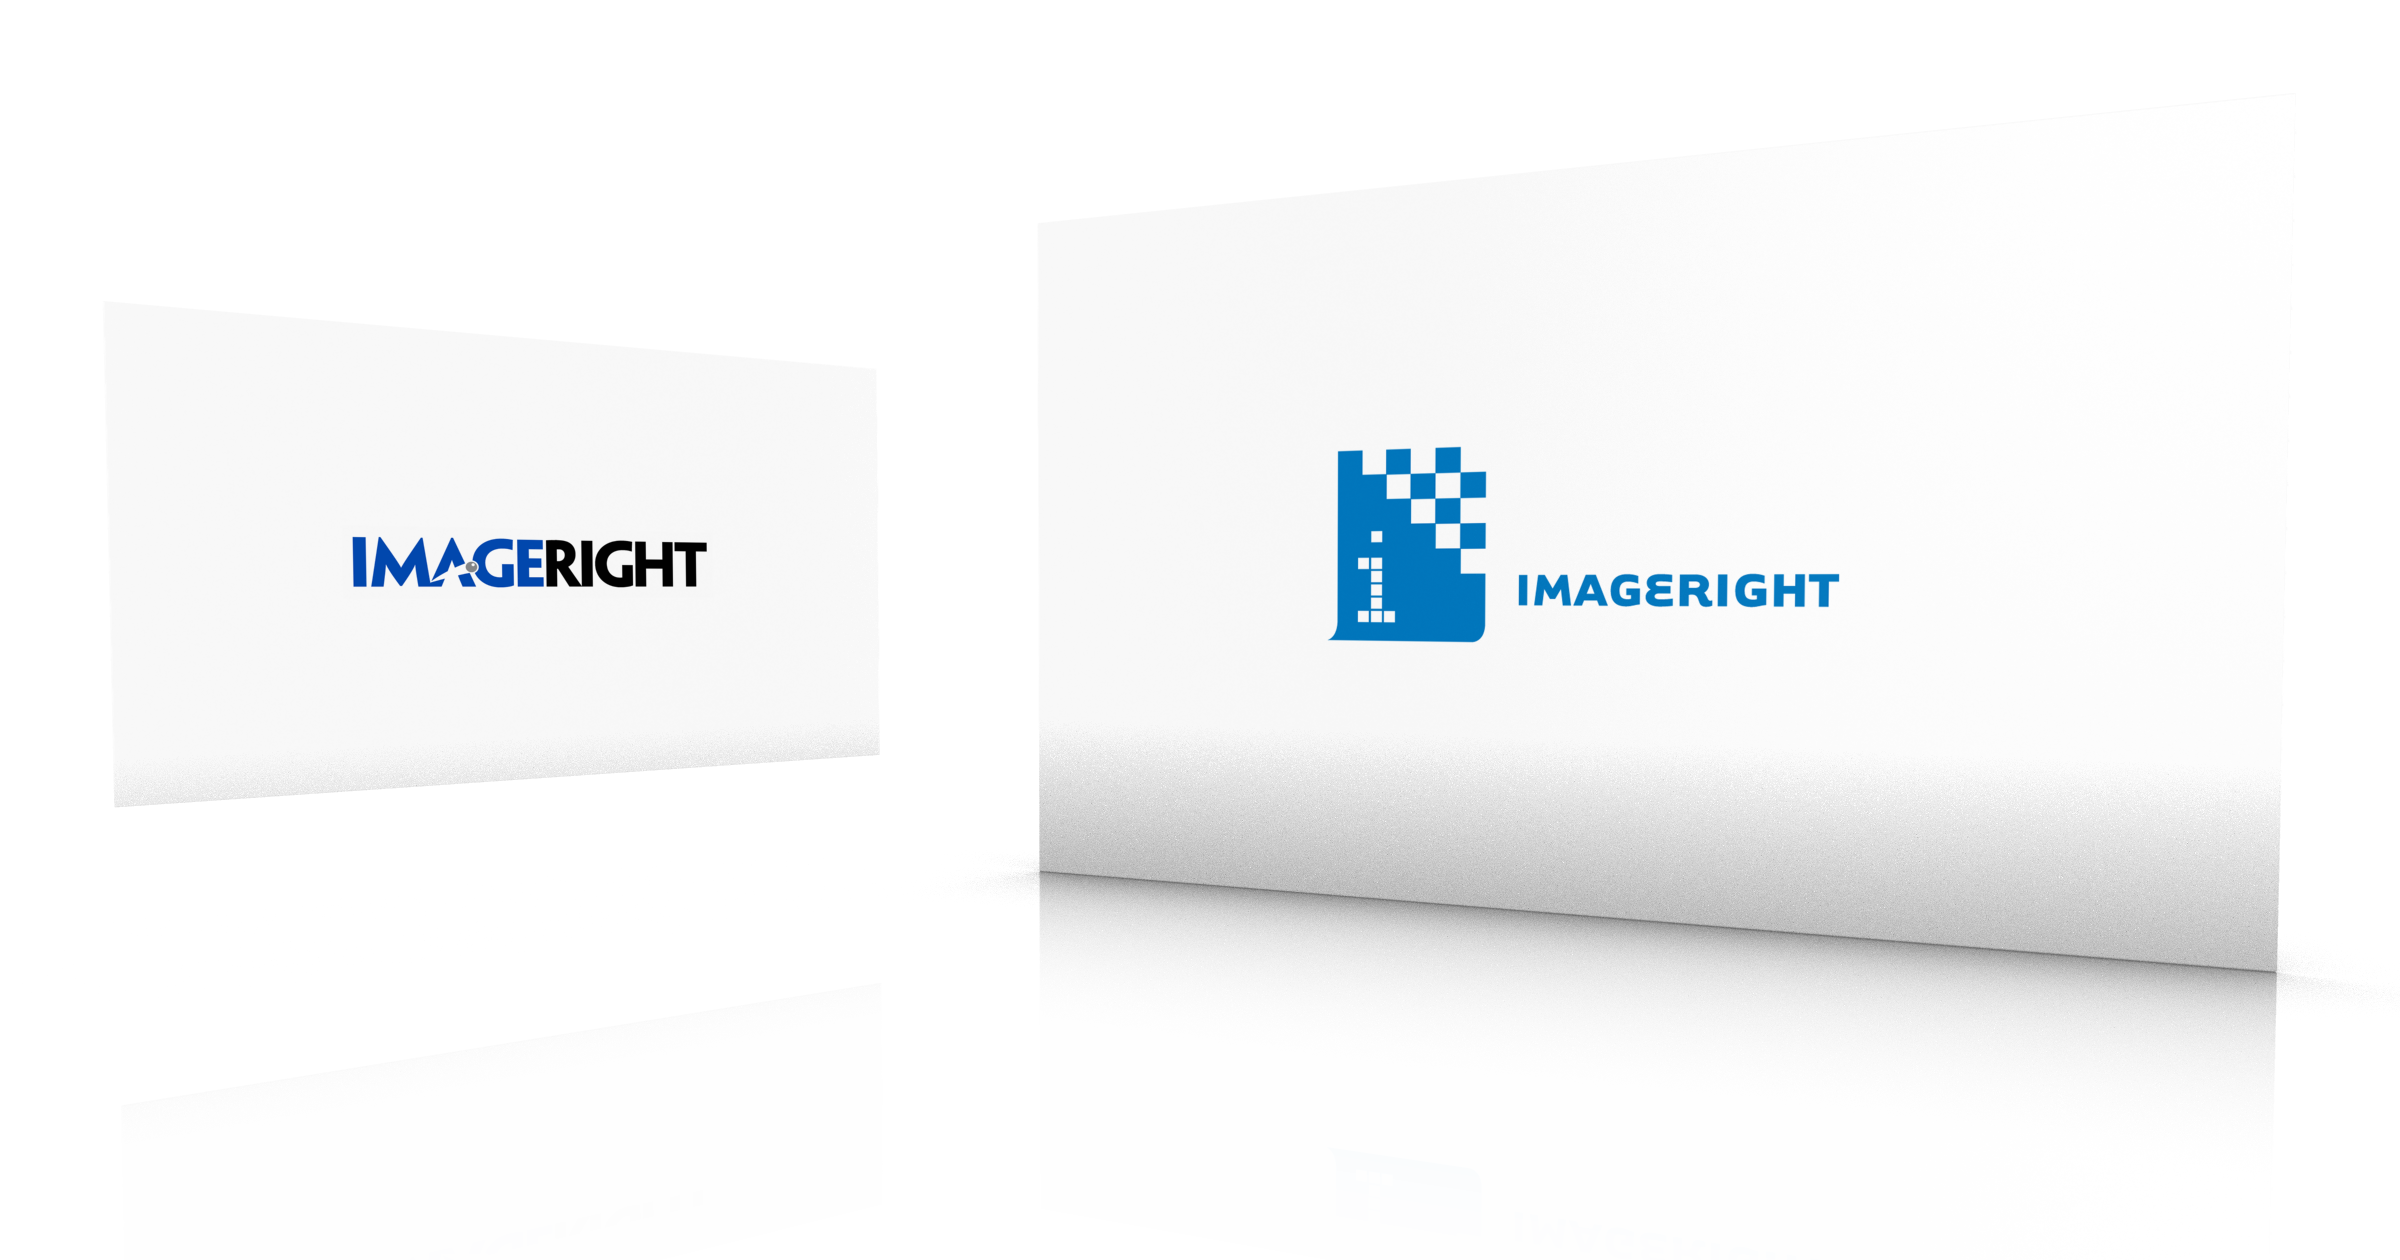 Imageright Identity: Before and After